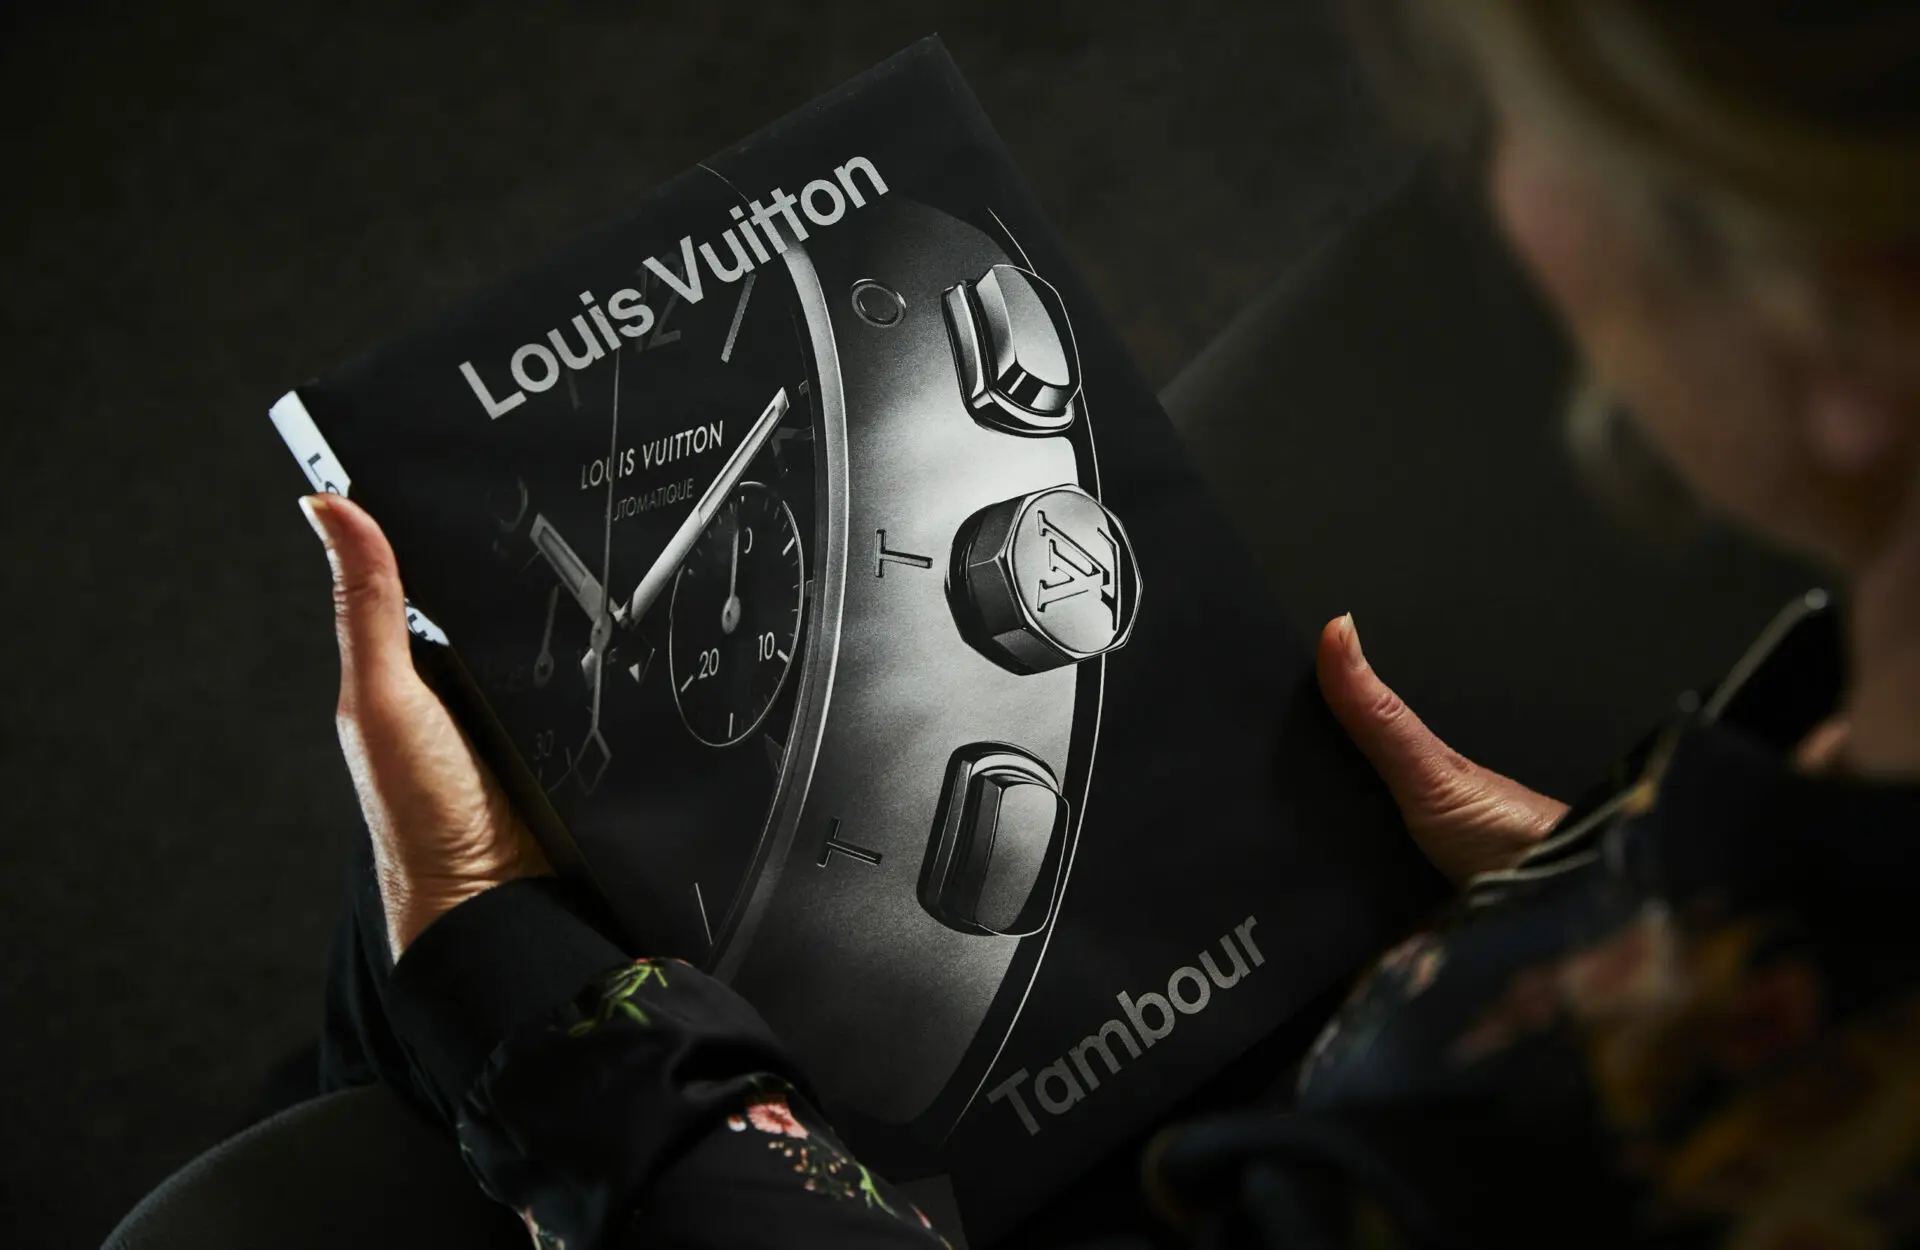 Louis Vuitton Tambour book is a tribute to their favourite model